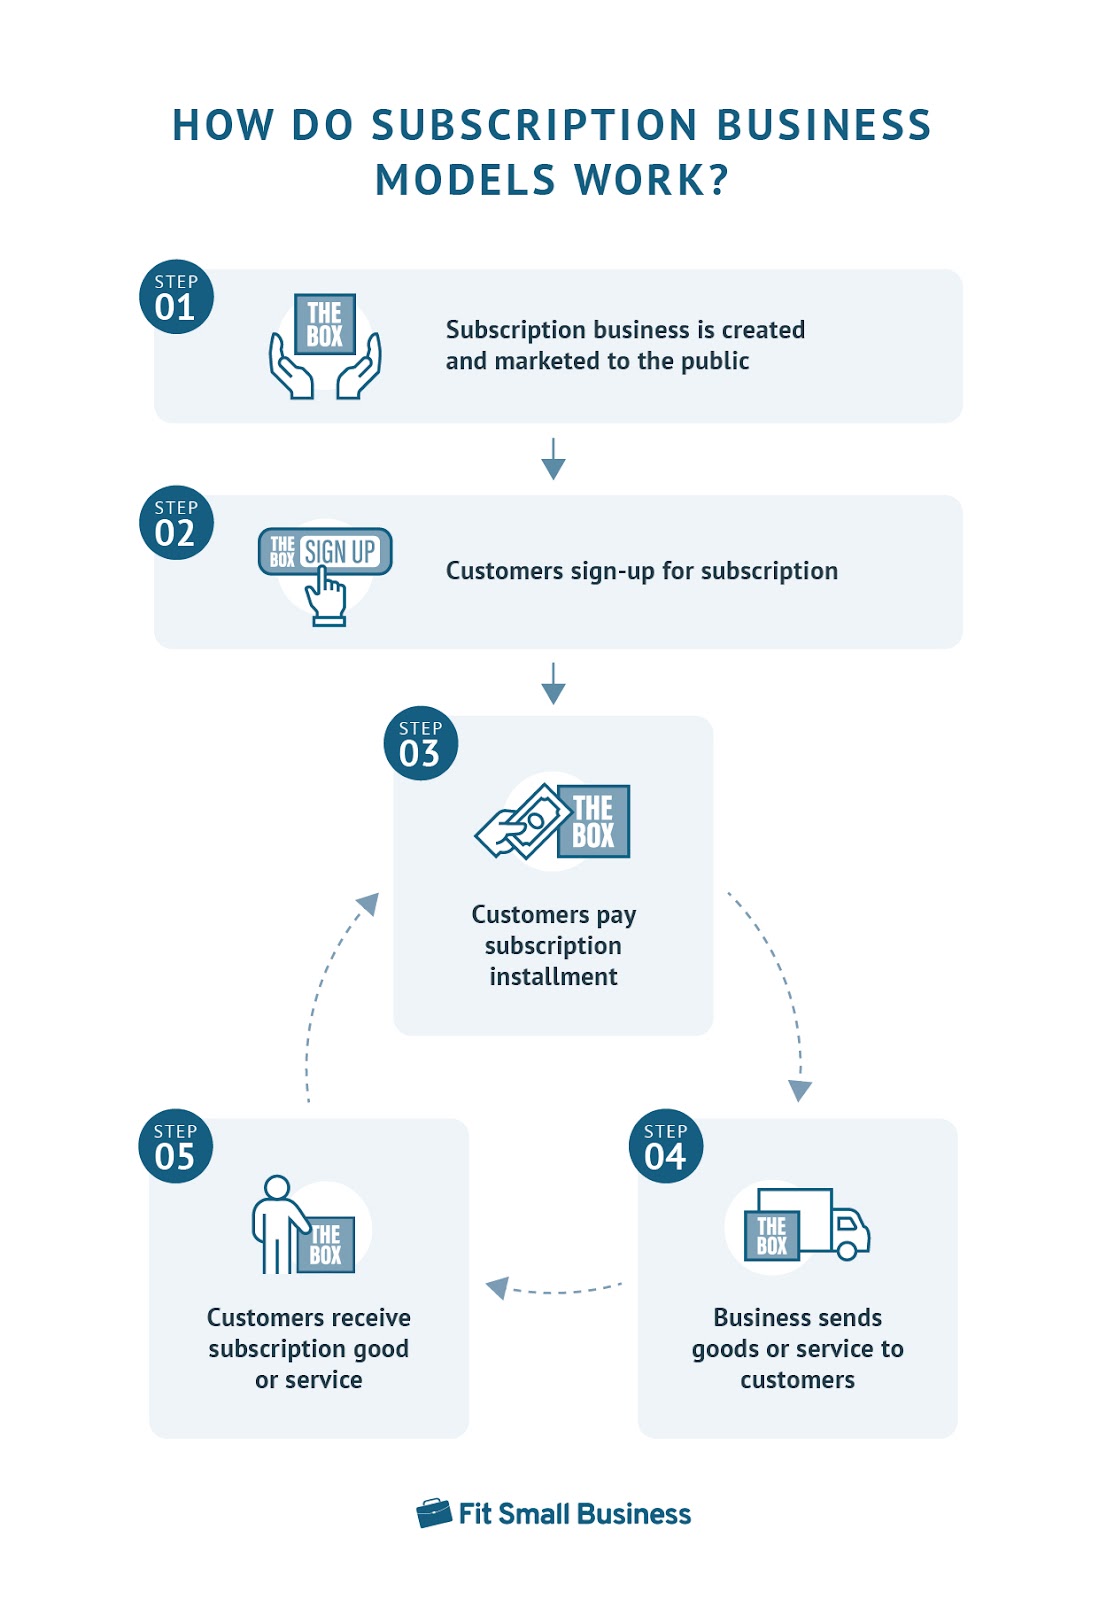 Five-step subscription business model process visualized with one step in each box with a representative image and brief text description.